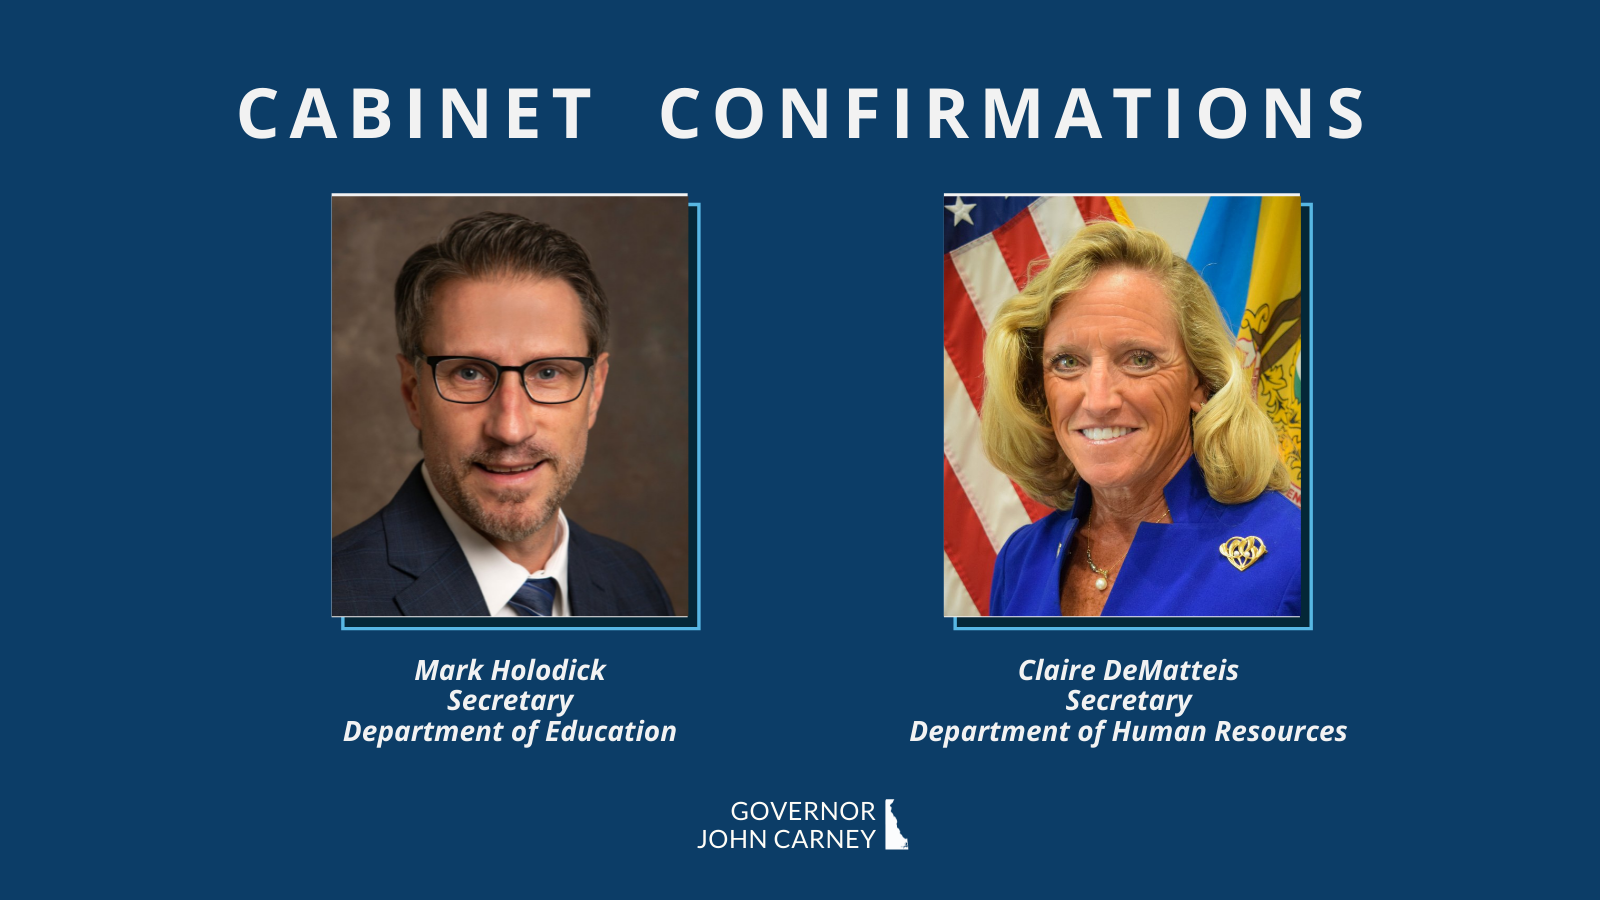 Cabinet Confirmation text with headshots of Mark Holodick and Claire DeMatteis